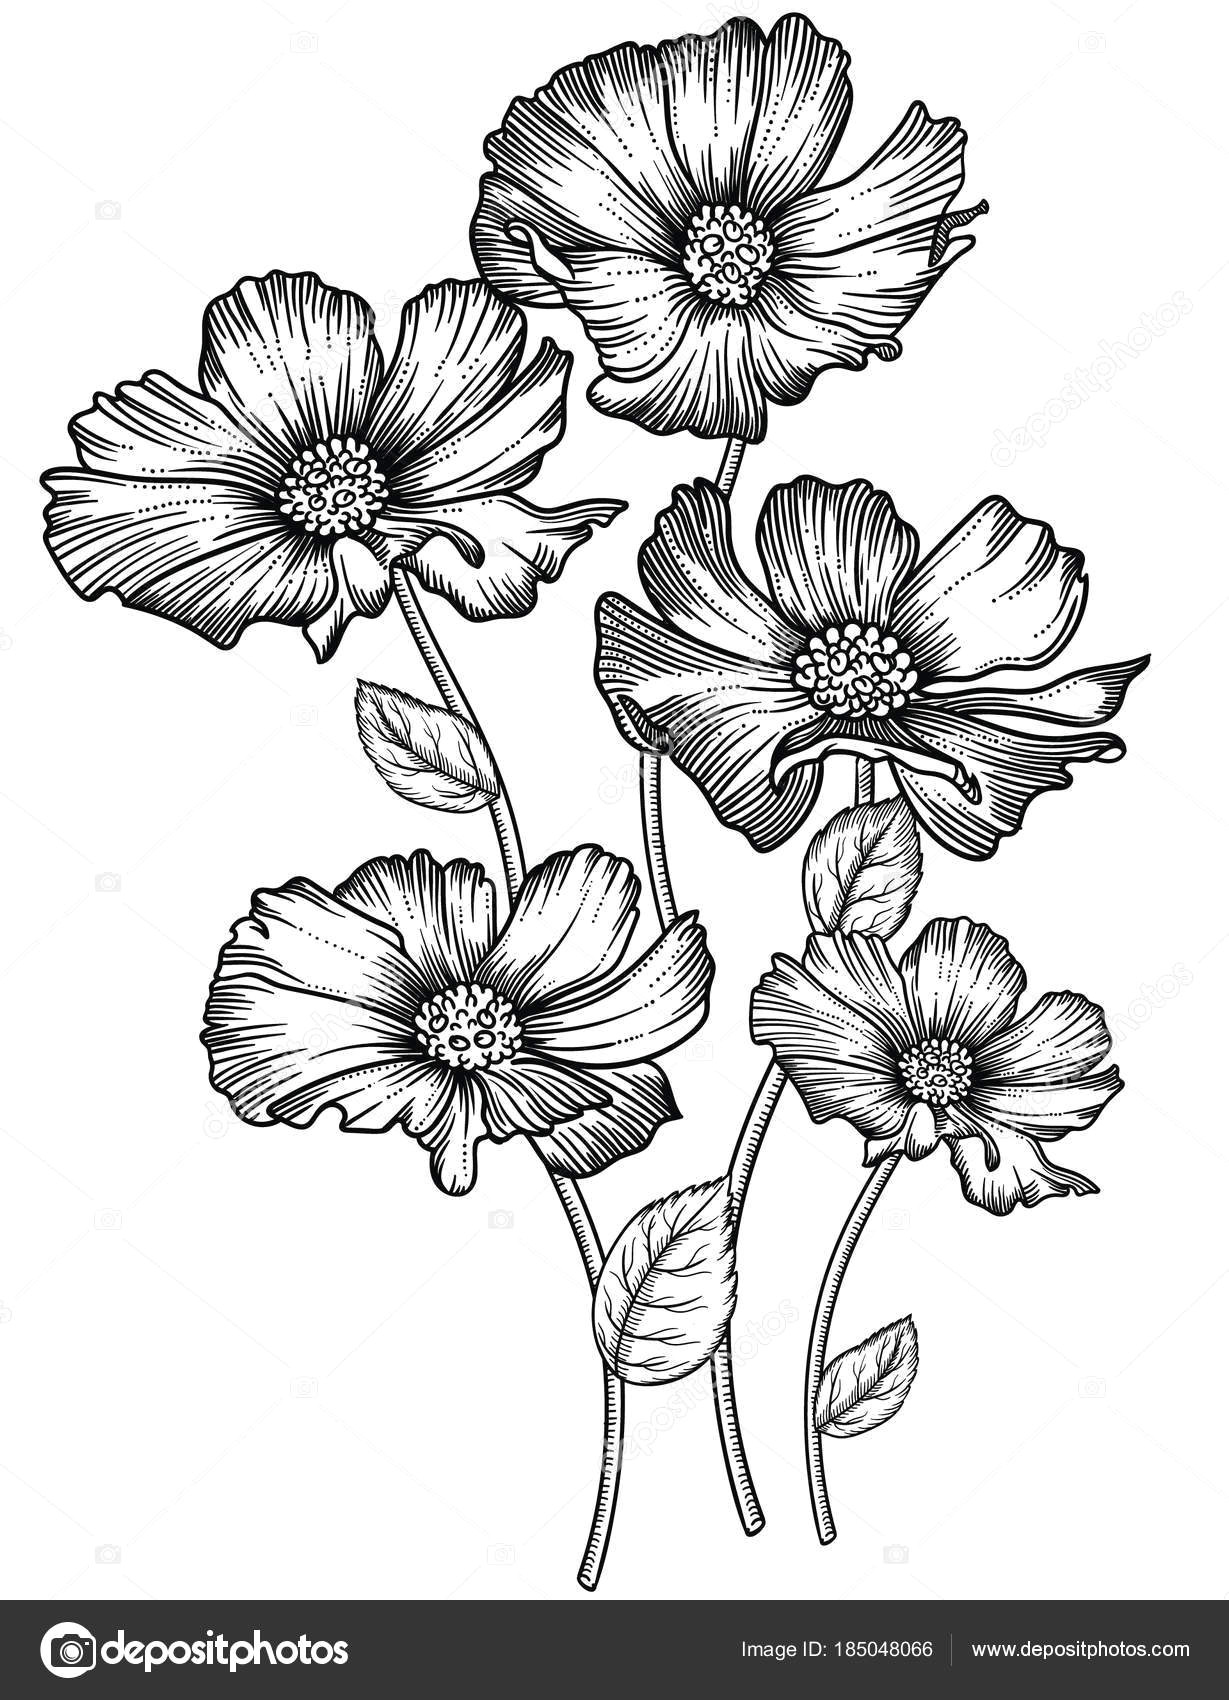 blooming forest flowers detailed hand drawn vector illustration romantic decorative flower drawing in line art all sketches objects isolated on white